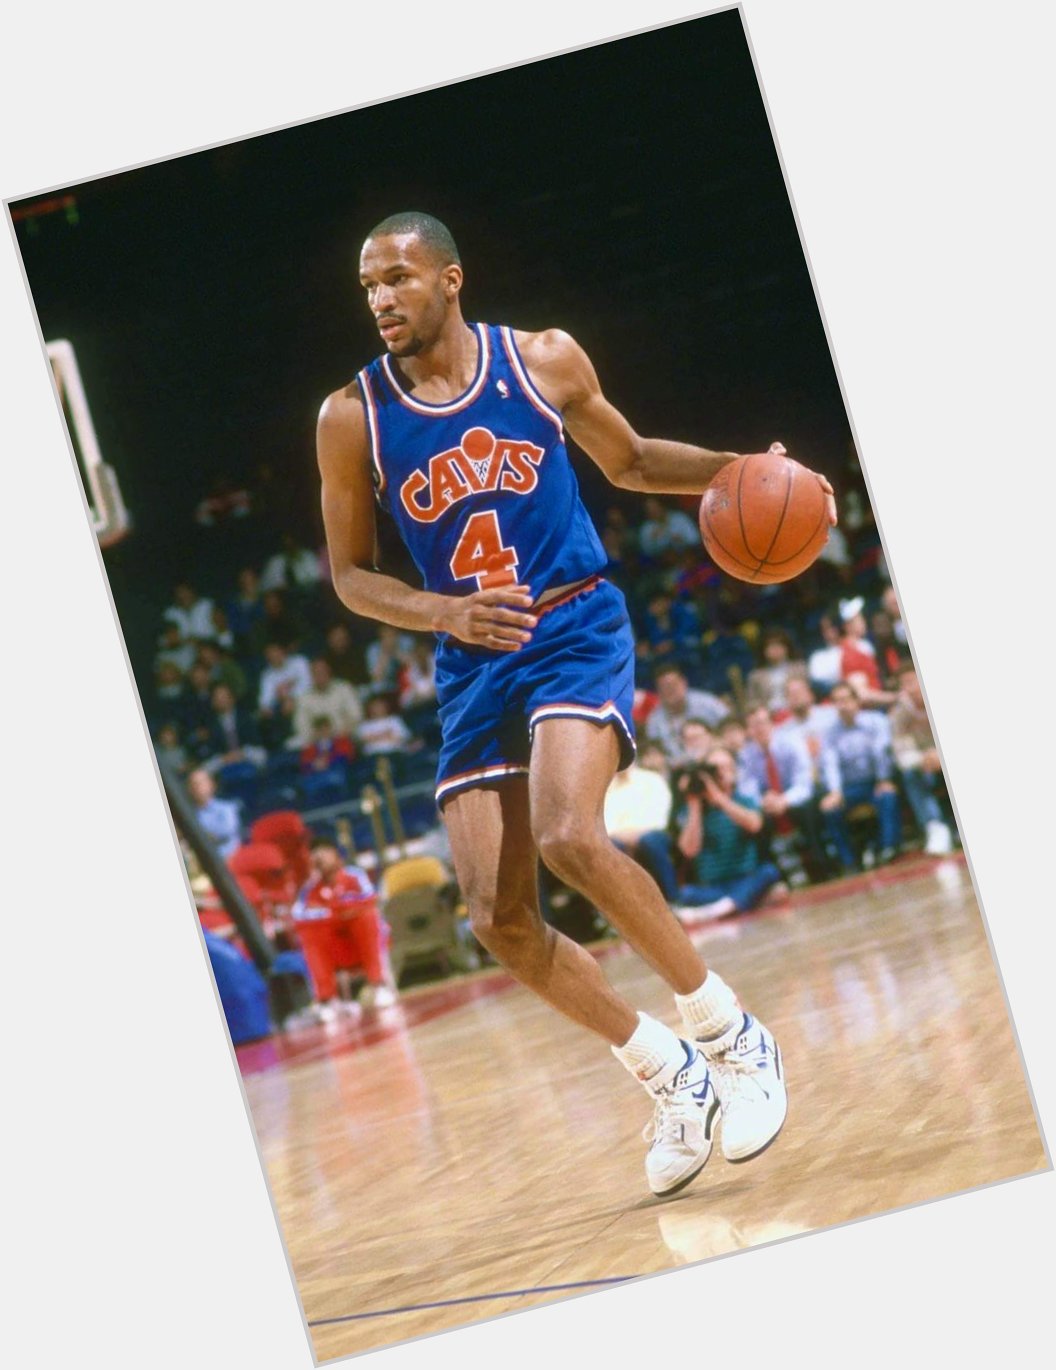 Happy birthday to the former Cleveland Cavalier Ron Harper. 